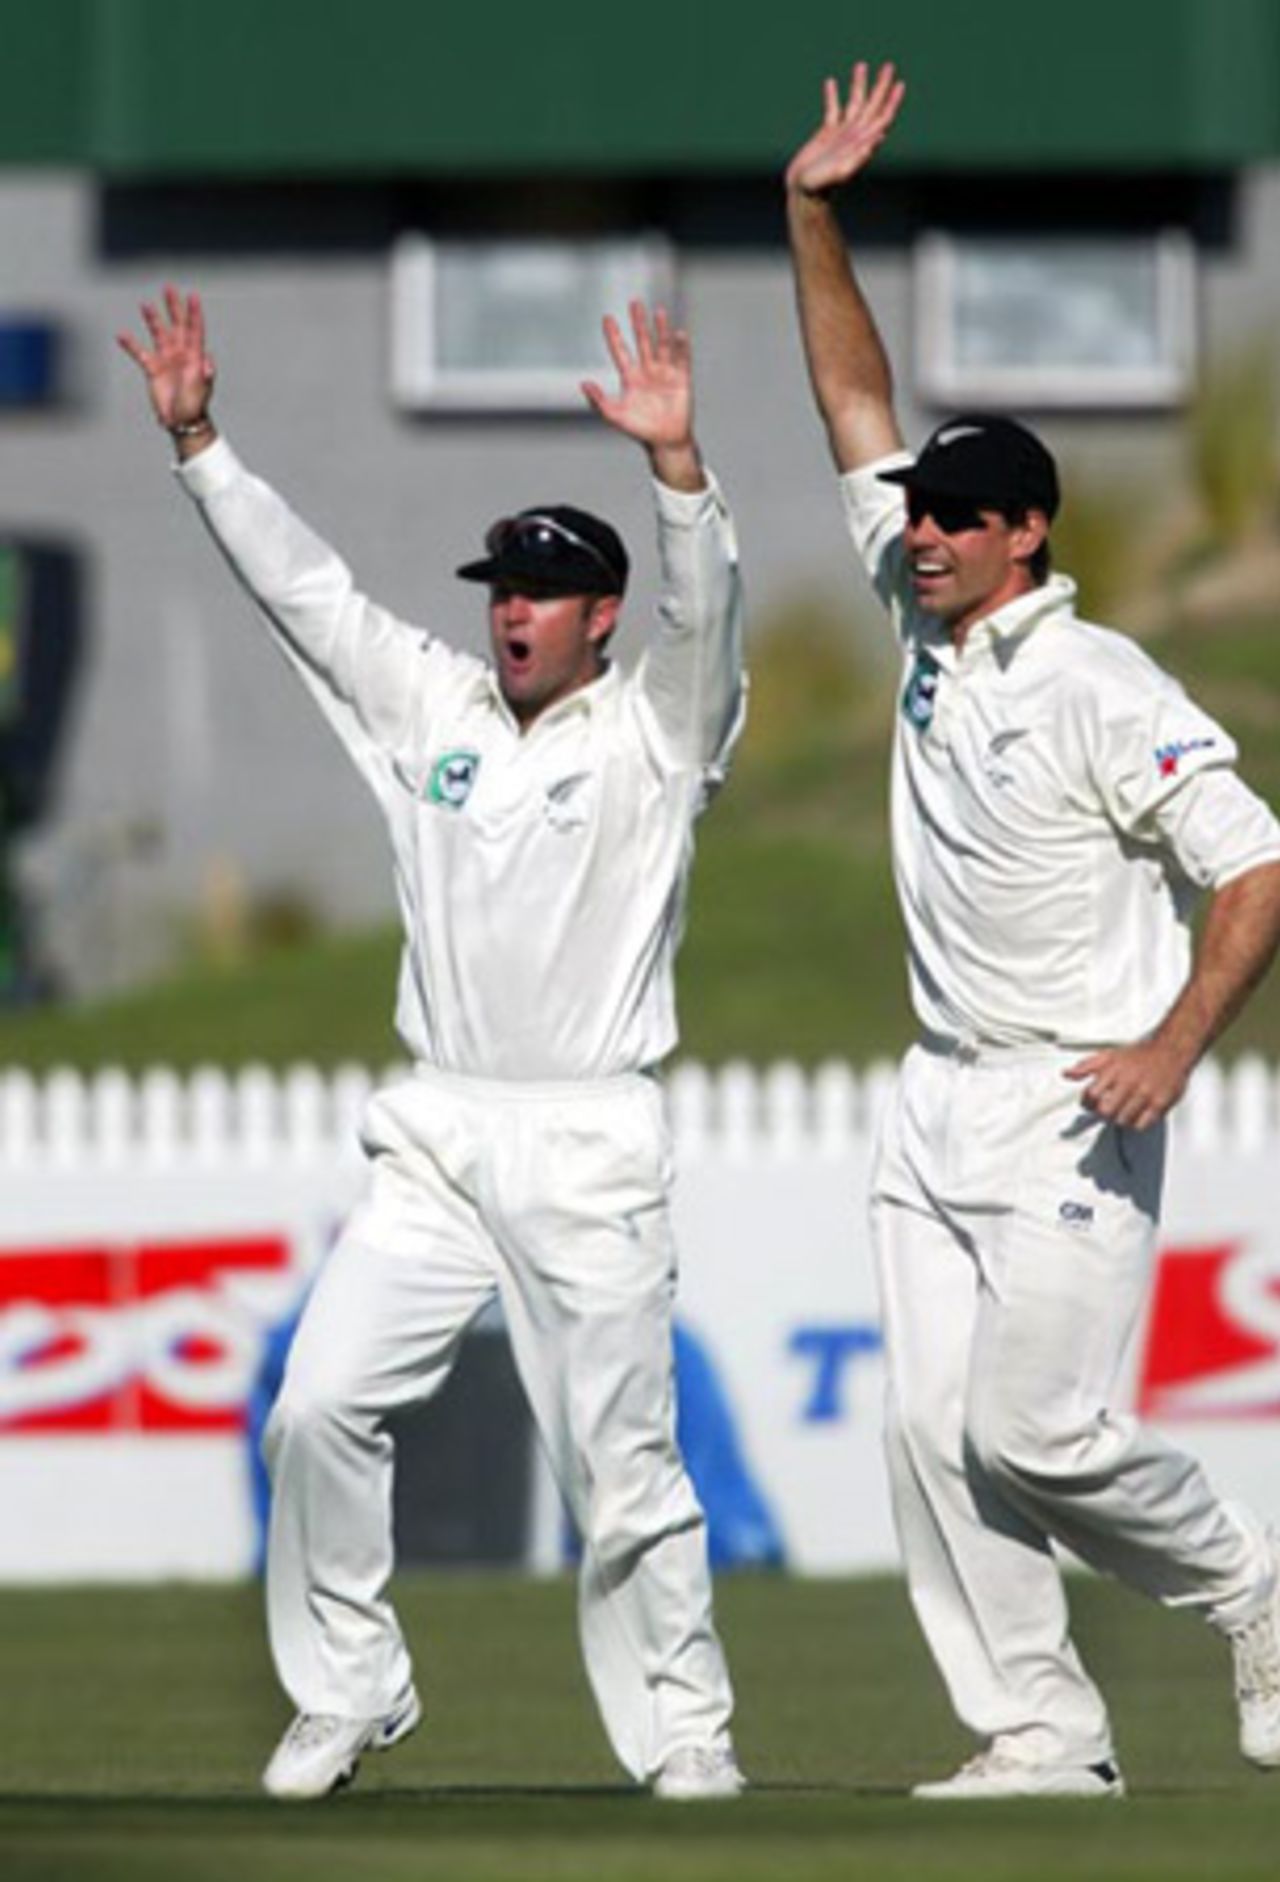 New Zealand slip fielders Nathan Astle (left) and Stephen Fleming celebrate the dismissal of India batsman Rahul Dravid, caught by wicket-keeper Robbie Hart off the bowling of Daryl Tuffey for nine. 2nd Test: New Zealand v India at Westpac Park, Hamilton, 19-23 December 2002 (20 December 2002).